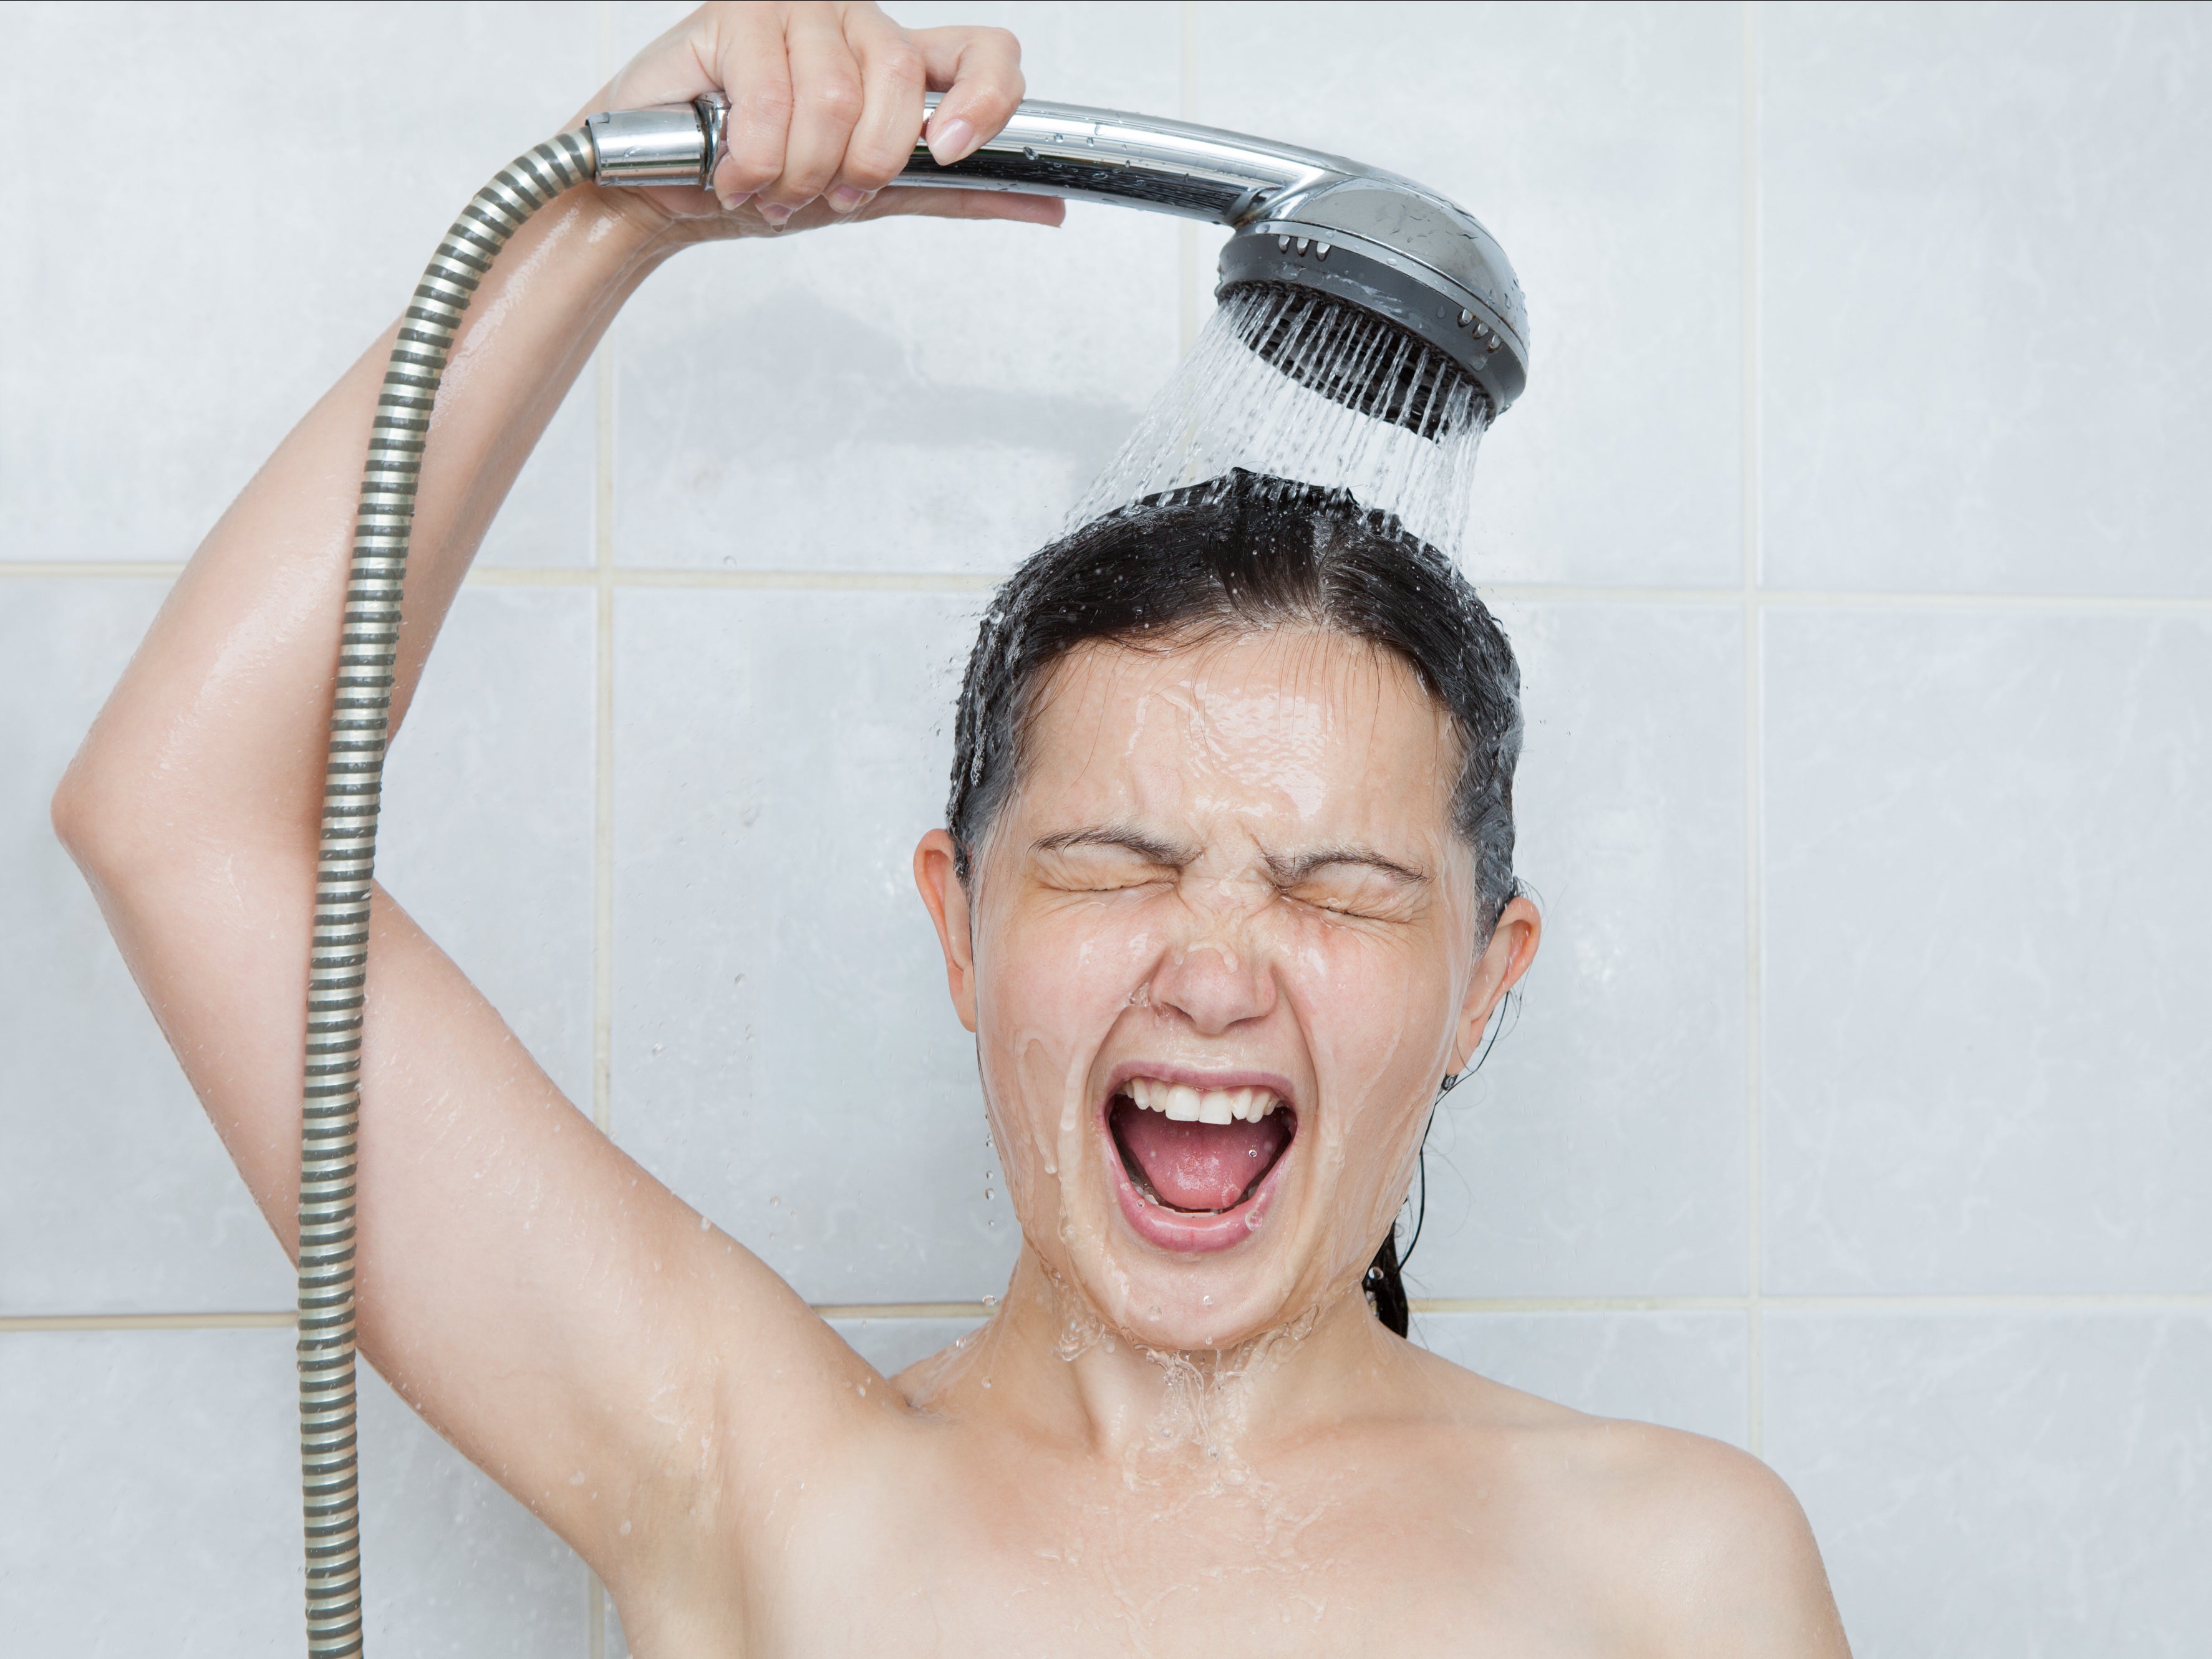 A cold shower could be just the ticket when it comes to stress reduction